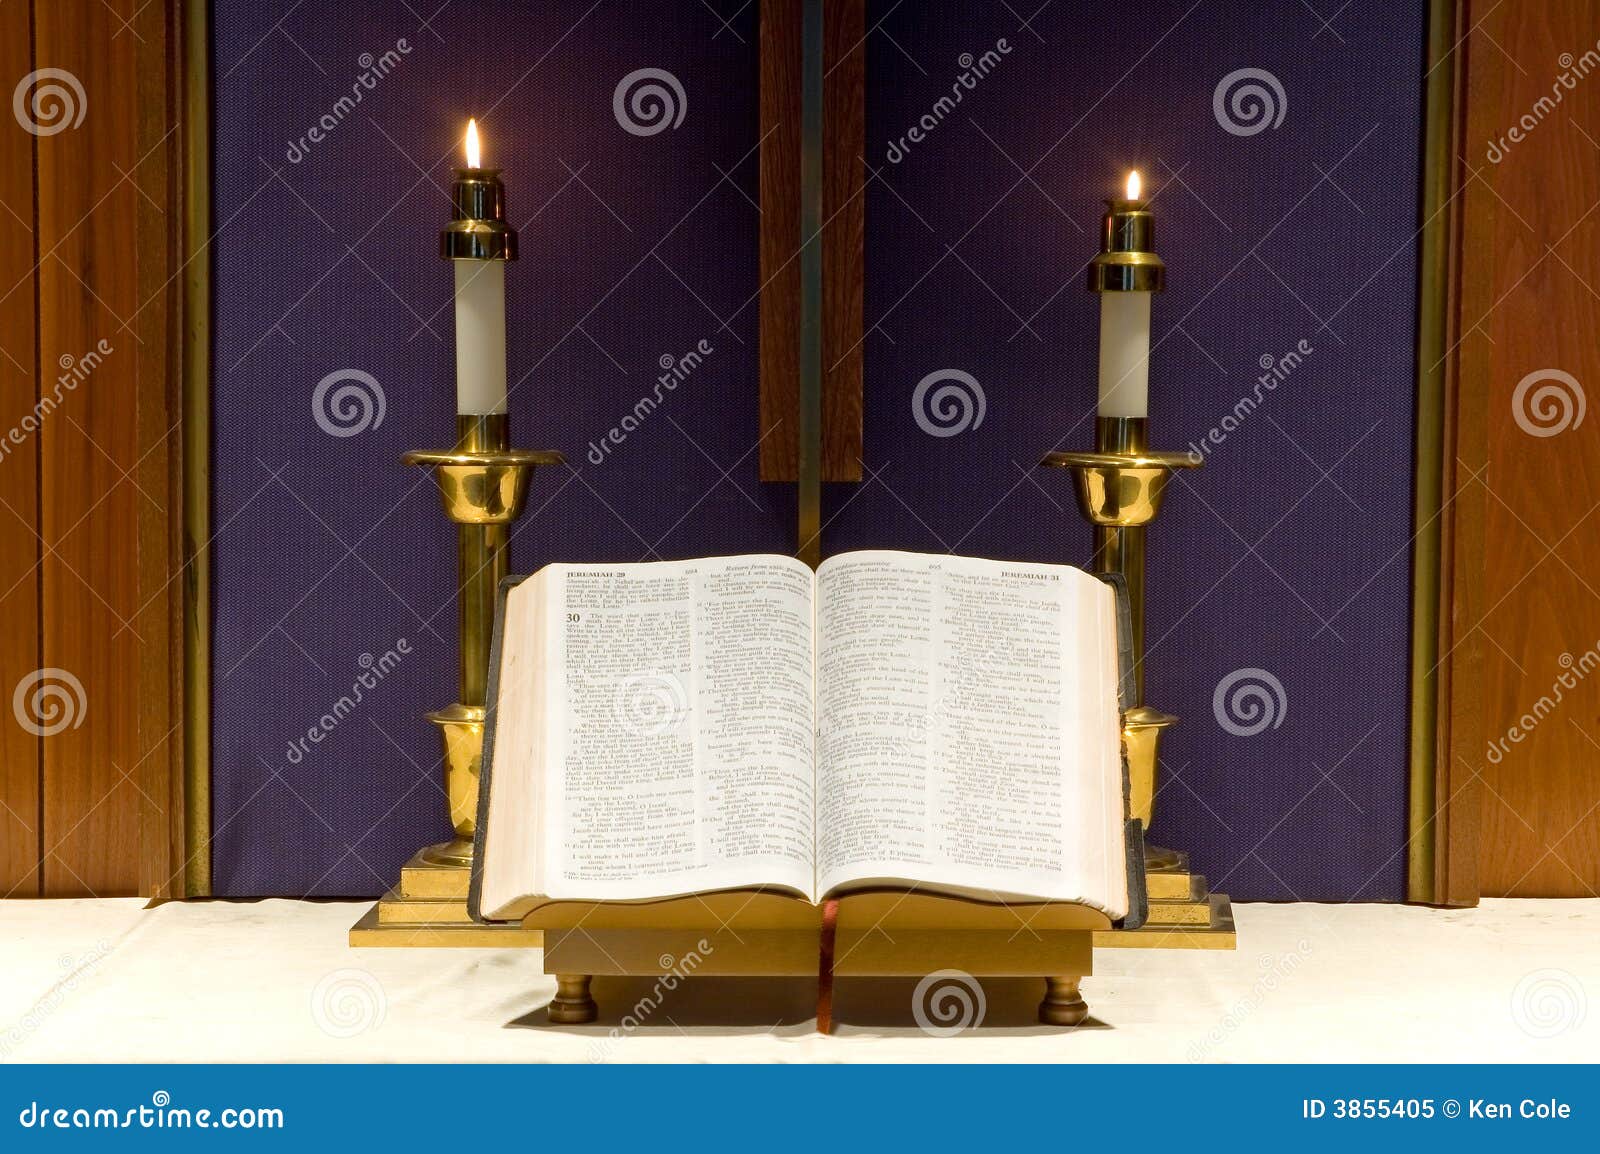 bible and candles on altar